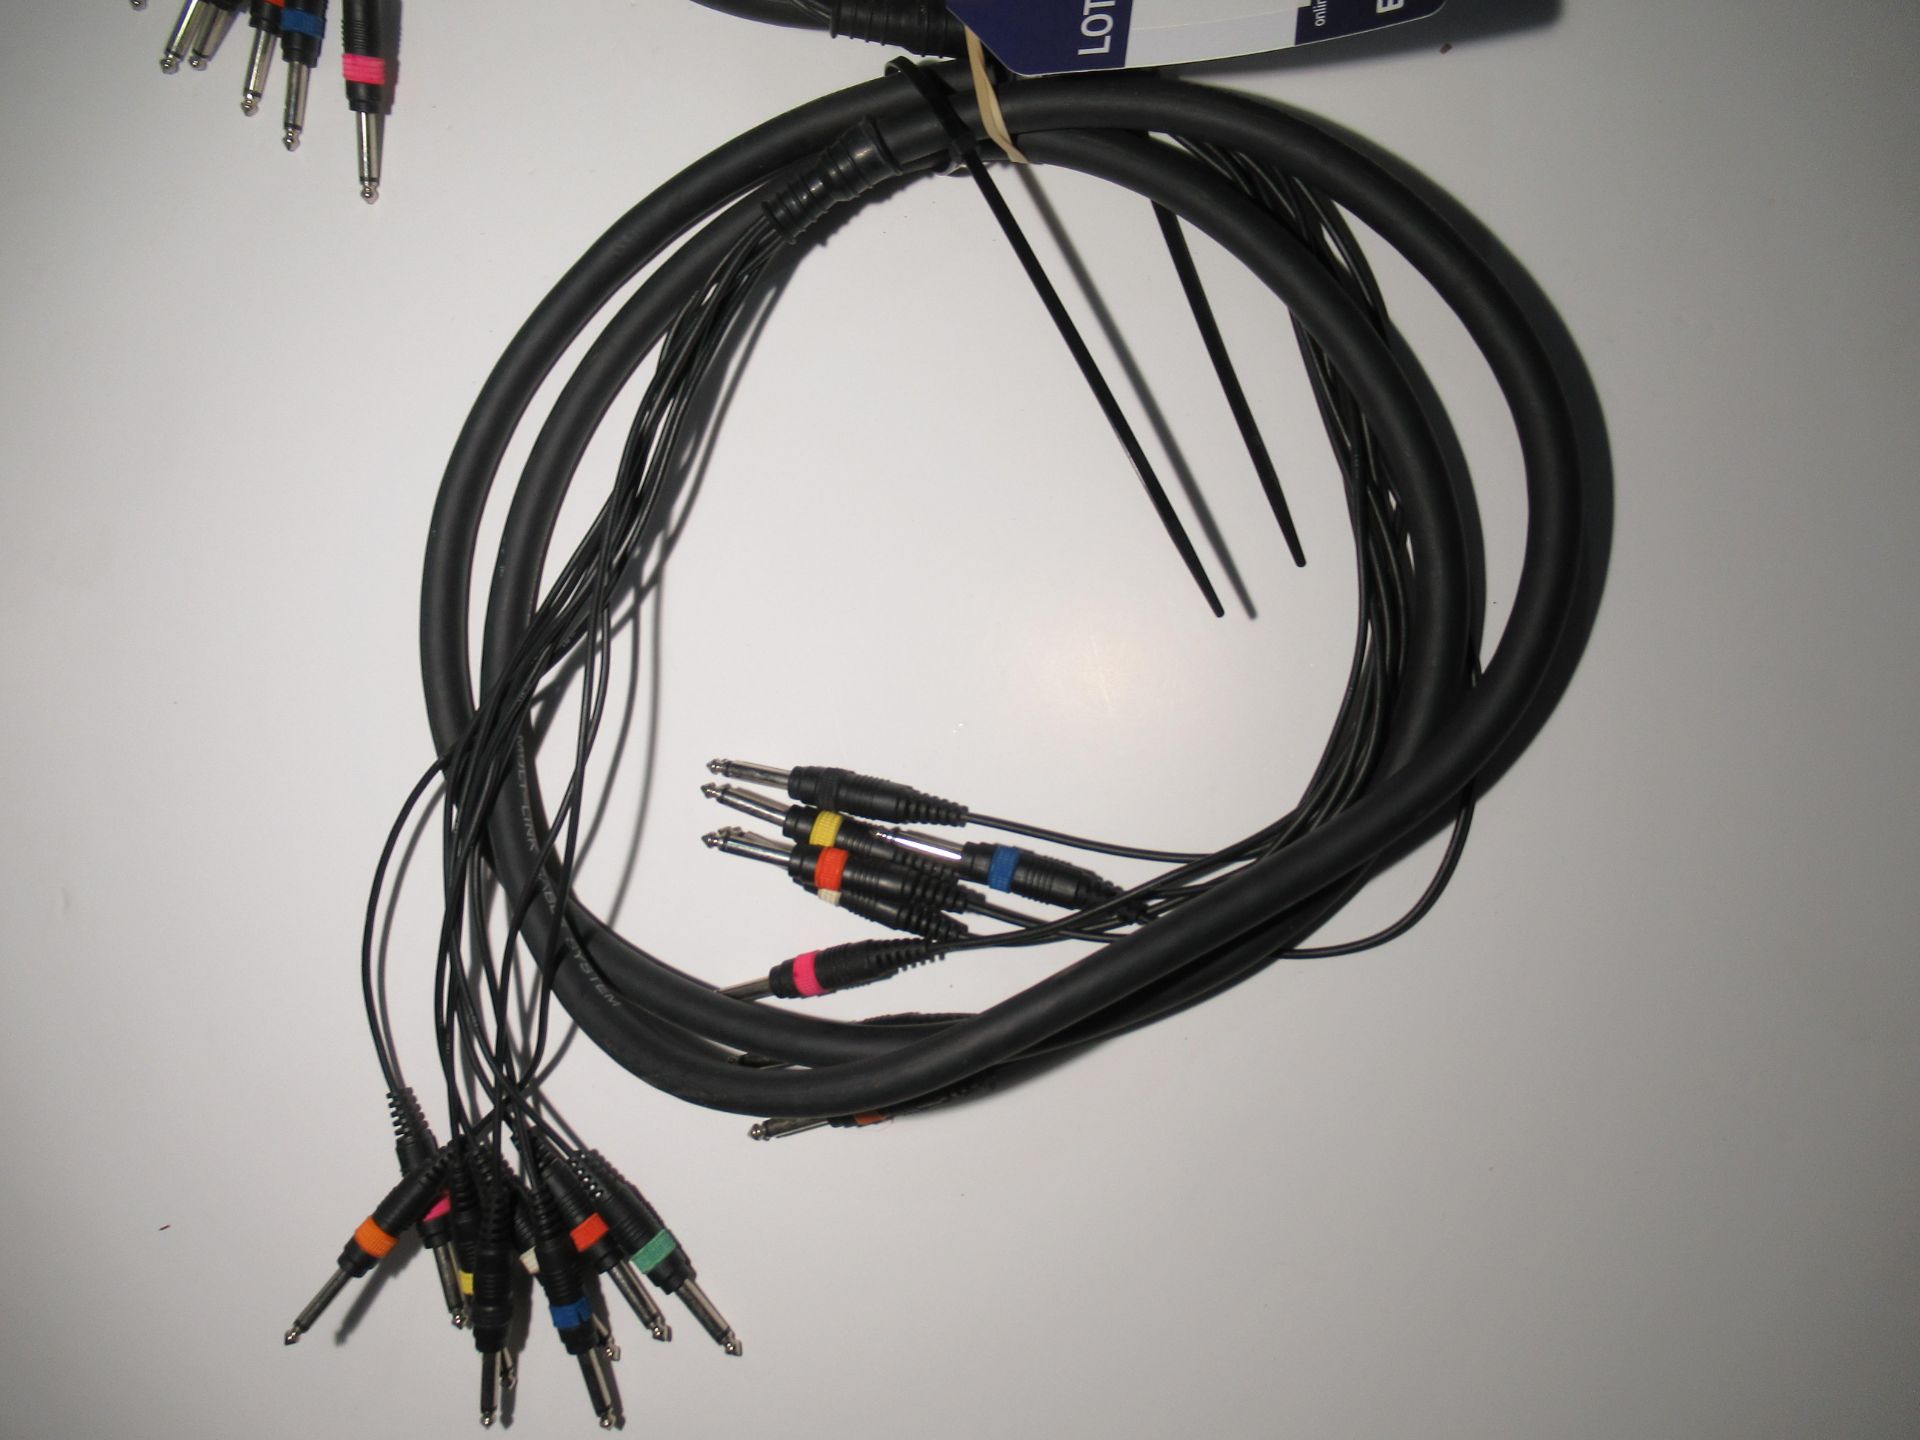 2 x 5m 8Way Snake Mono 6.35mm Jack Cables - Image 3 of 3